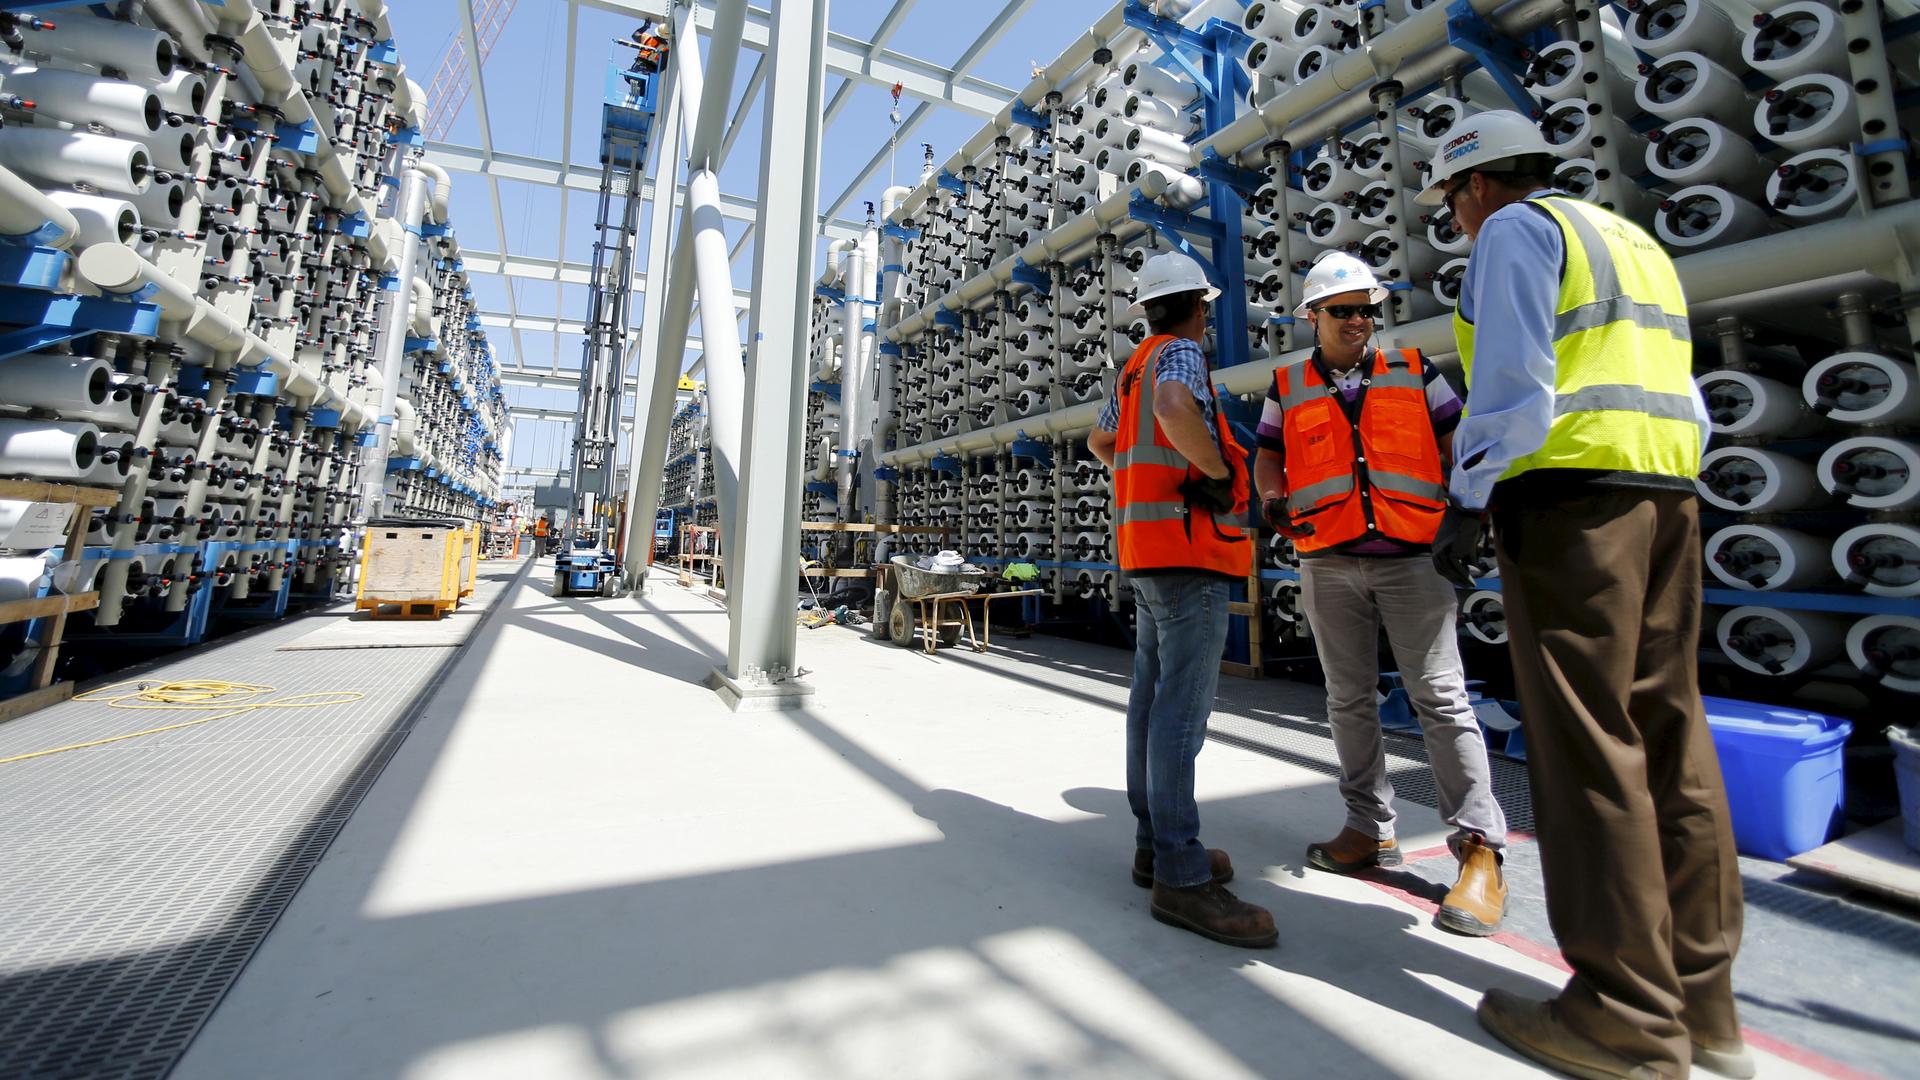 Poseidon Water employees stand between rows of reverse osmosis filters at the Western Hemisphere's largest seawater desalination plant, currently under construction in Carlsbad, California.